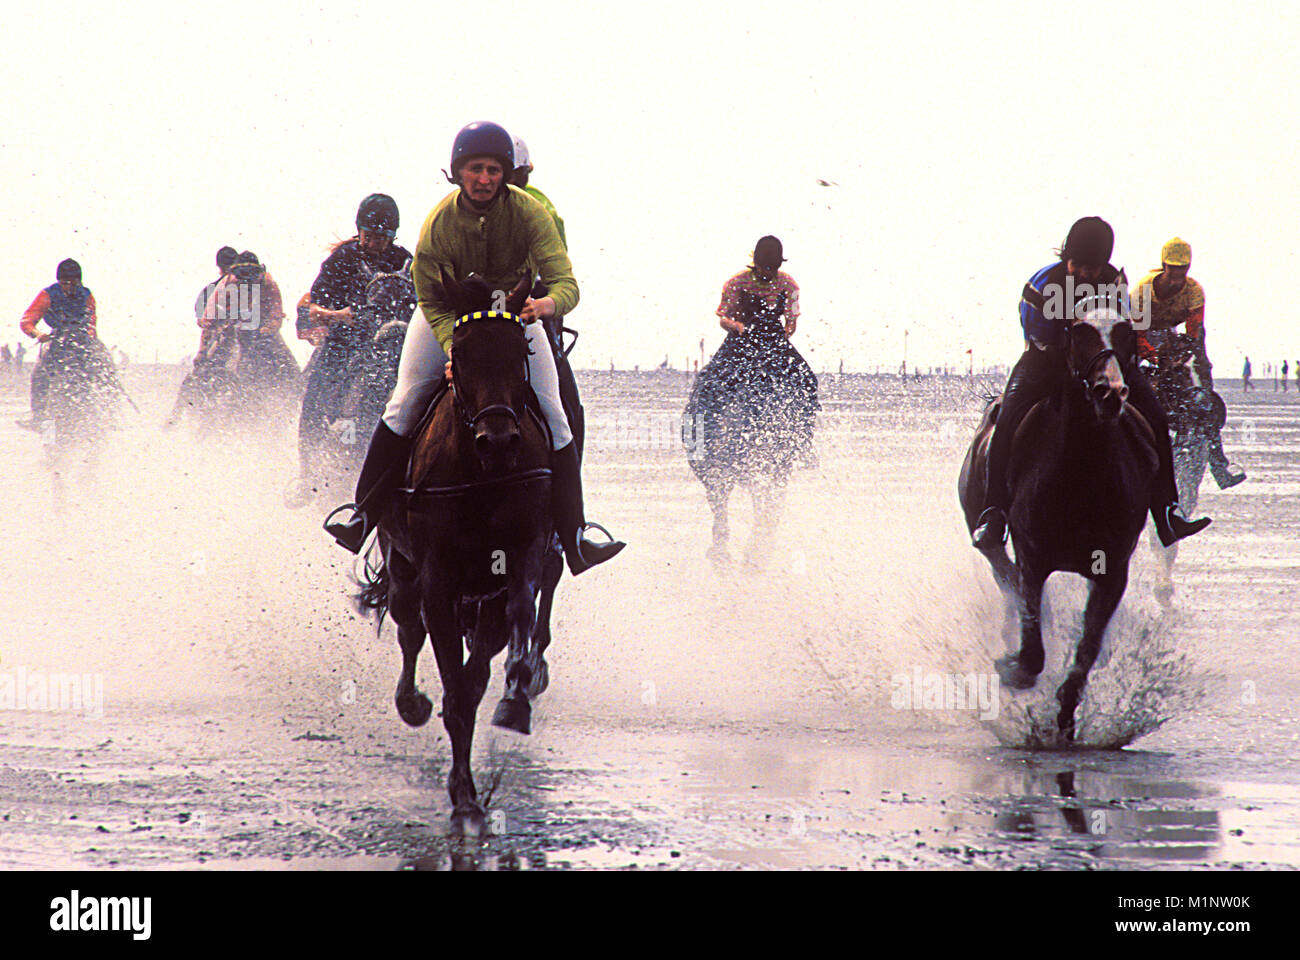 Germany, Lower Saxony, the horse race at the tidal shallows in Duhnen near Cuxhaven.  Deutschland, Niedersachsen, das Duhner Wattrennen bei Cuxhaven. Stock Photo